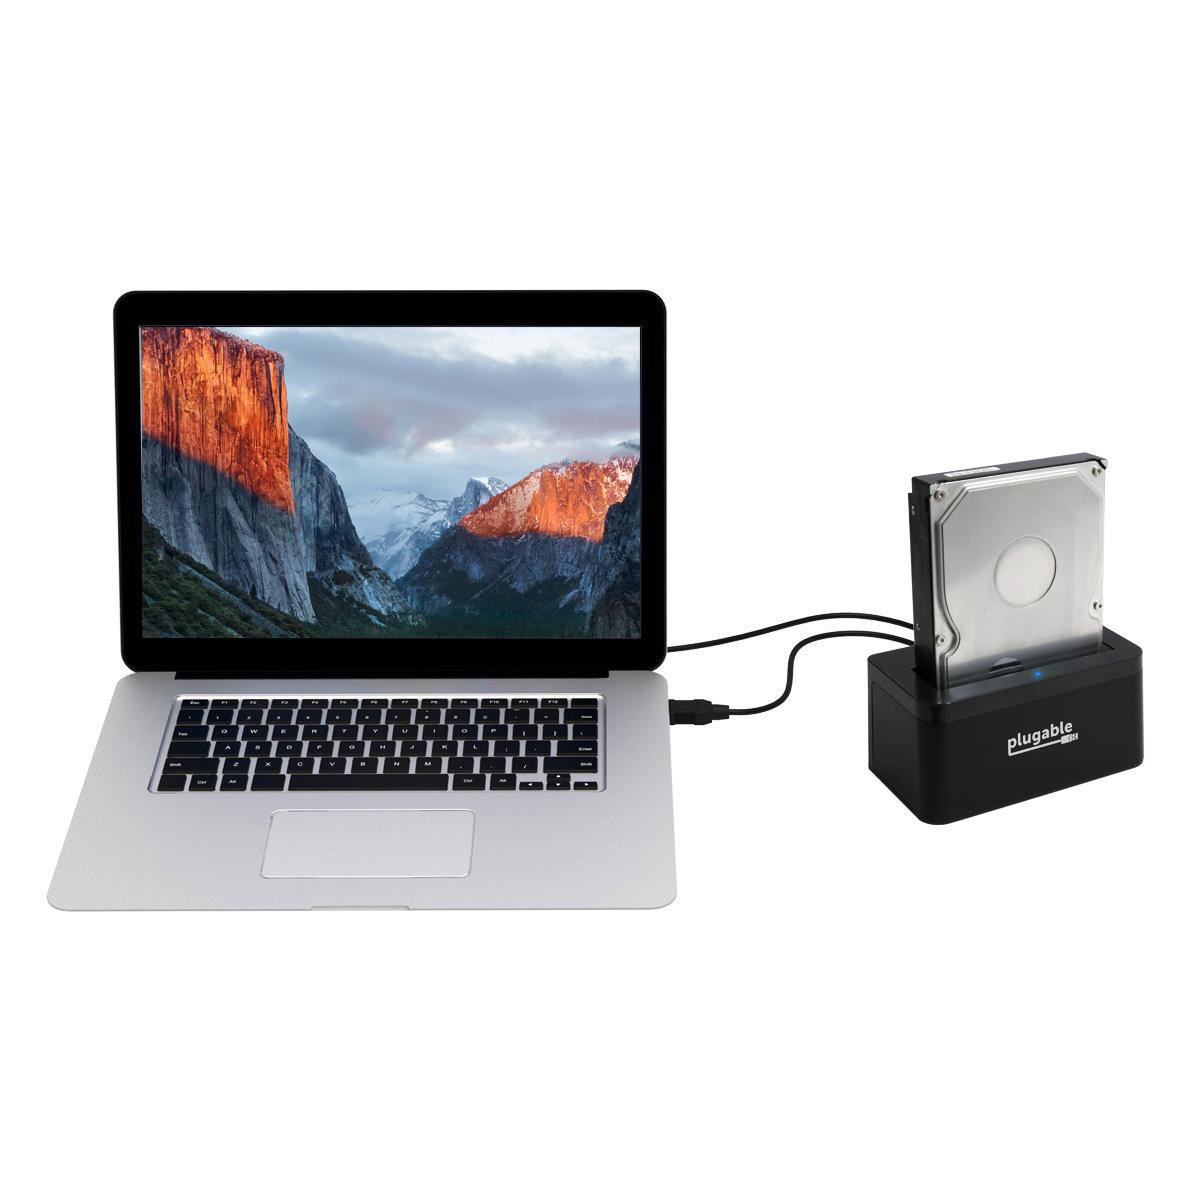 Plugable USB 3.1 Gen 2 10Gbps SATA Upright Hard Drive Dock and SSD Dock (includes both USB-C and USB 3.0 cables, supports 10TB+ drives) - image 3 of 6